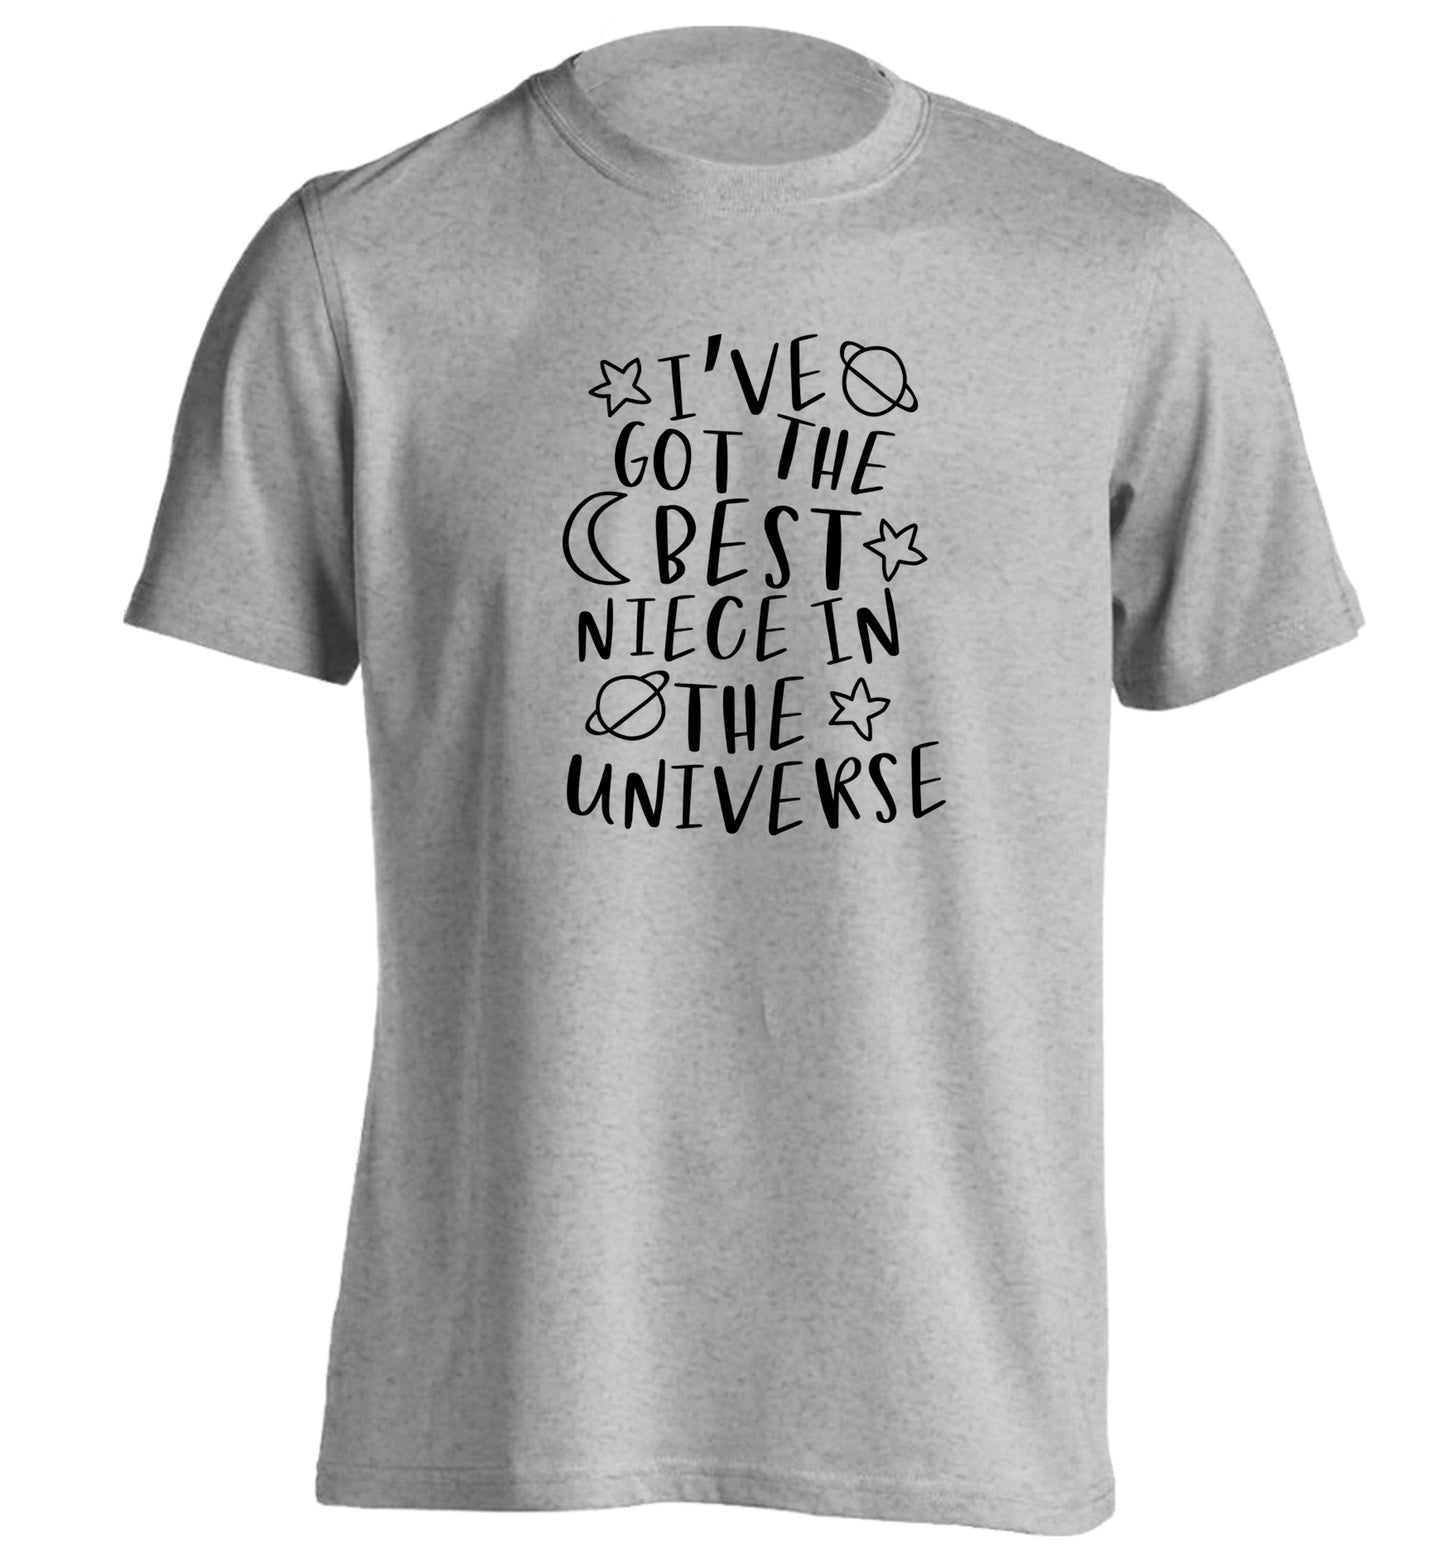 I've got the best niece in the universe adults unisex grey Tshirt 2XL